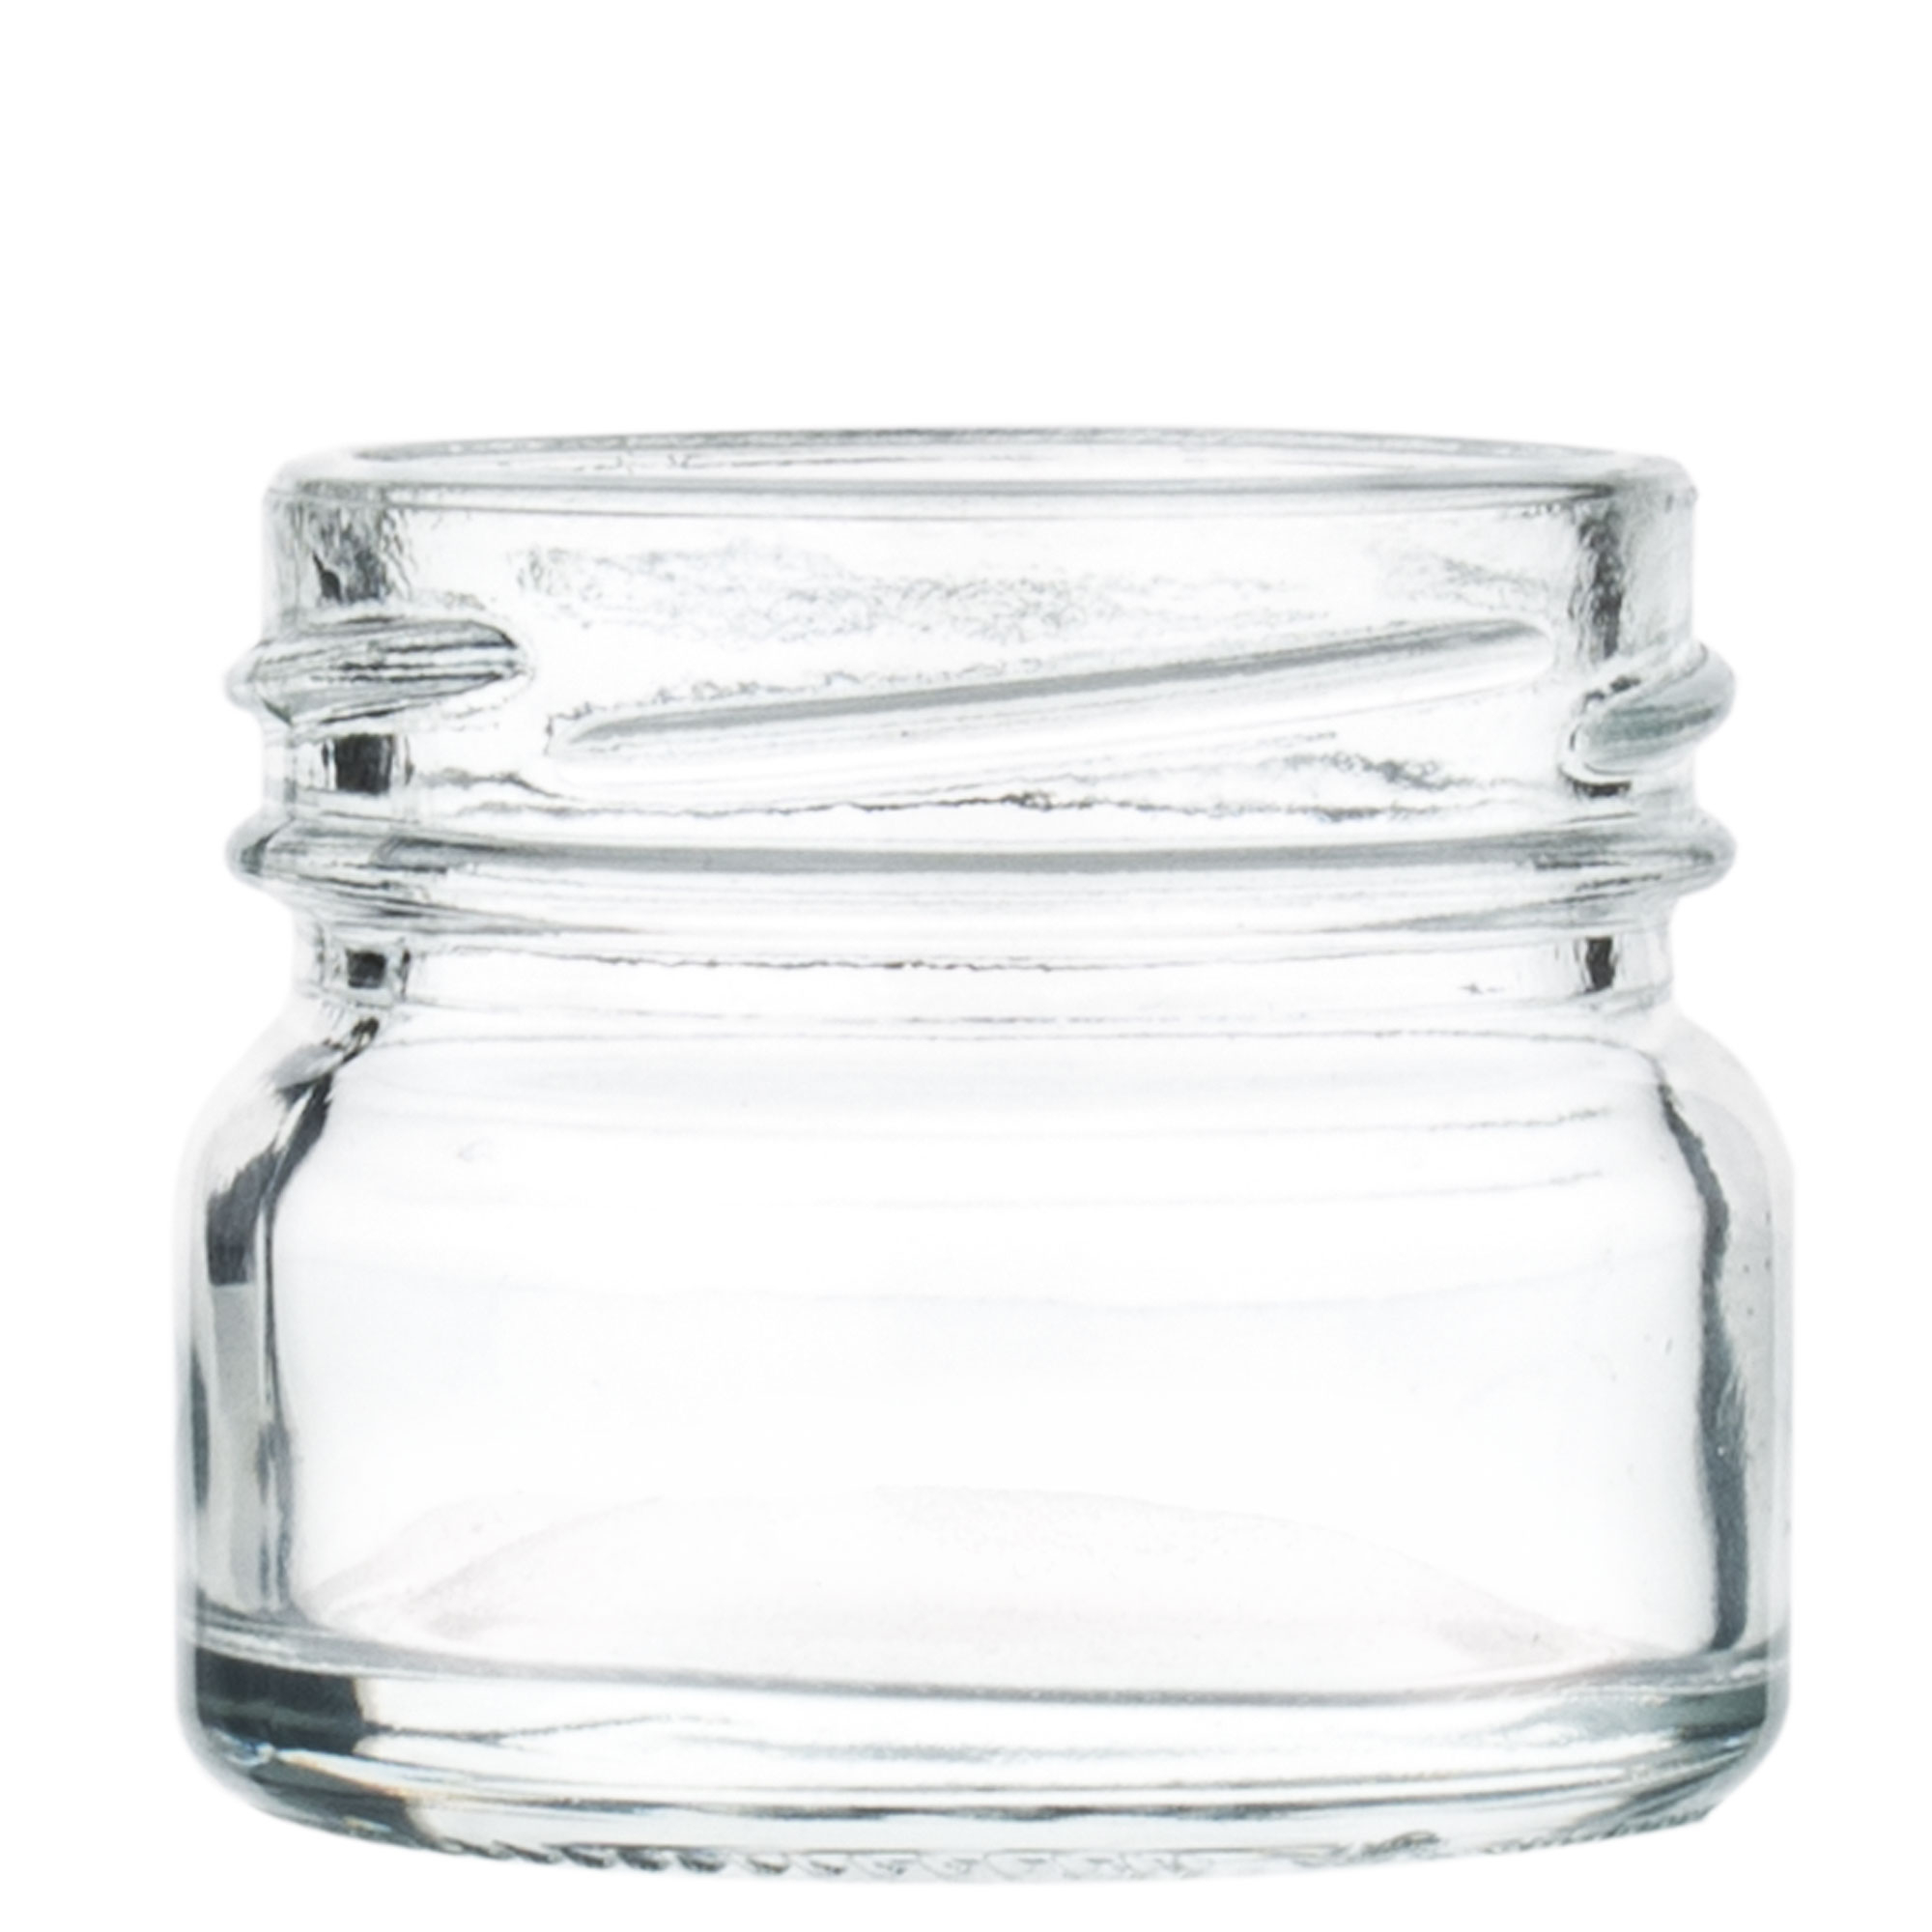 Lid for mini jar, TO 43 - gold-colored